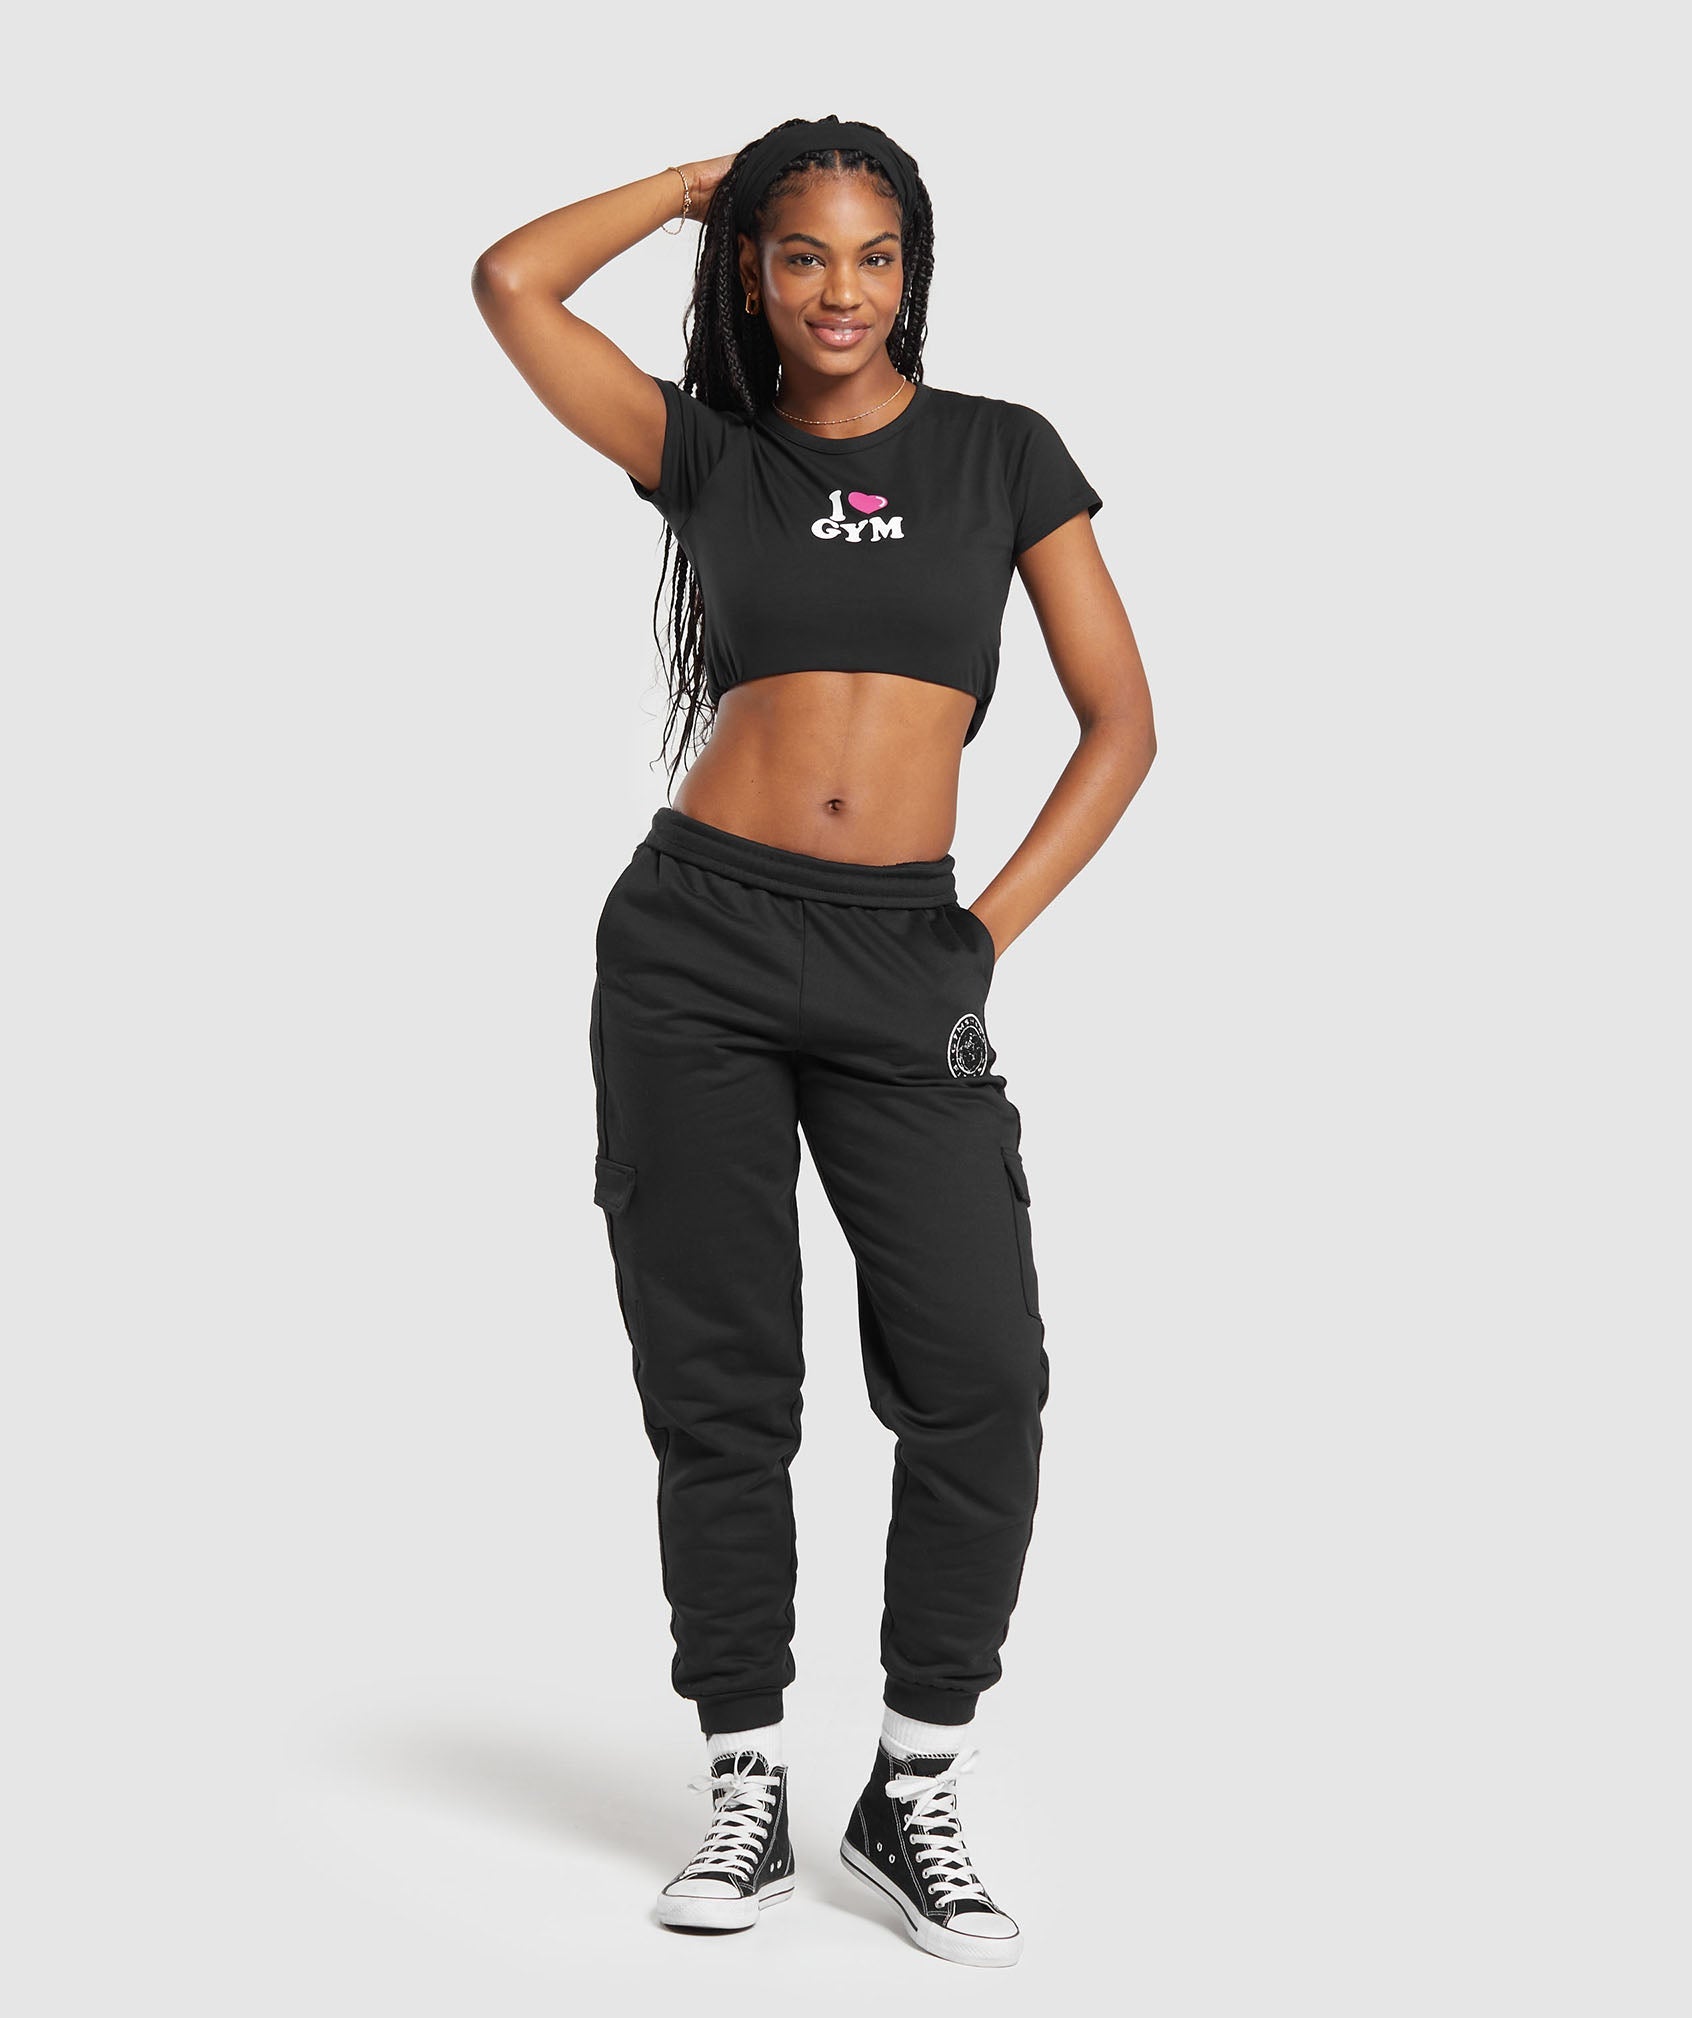 I Heart Gym Baby T-Shirt in Black - view 4